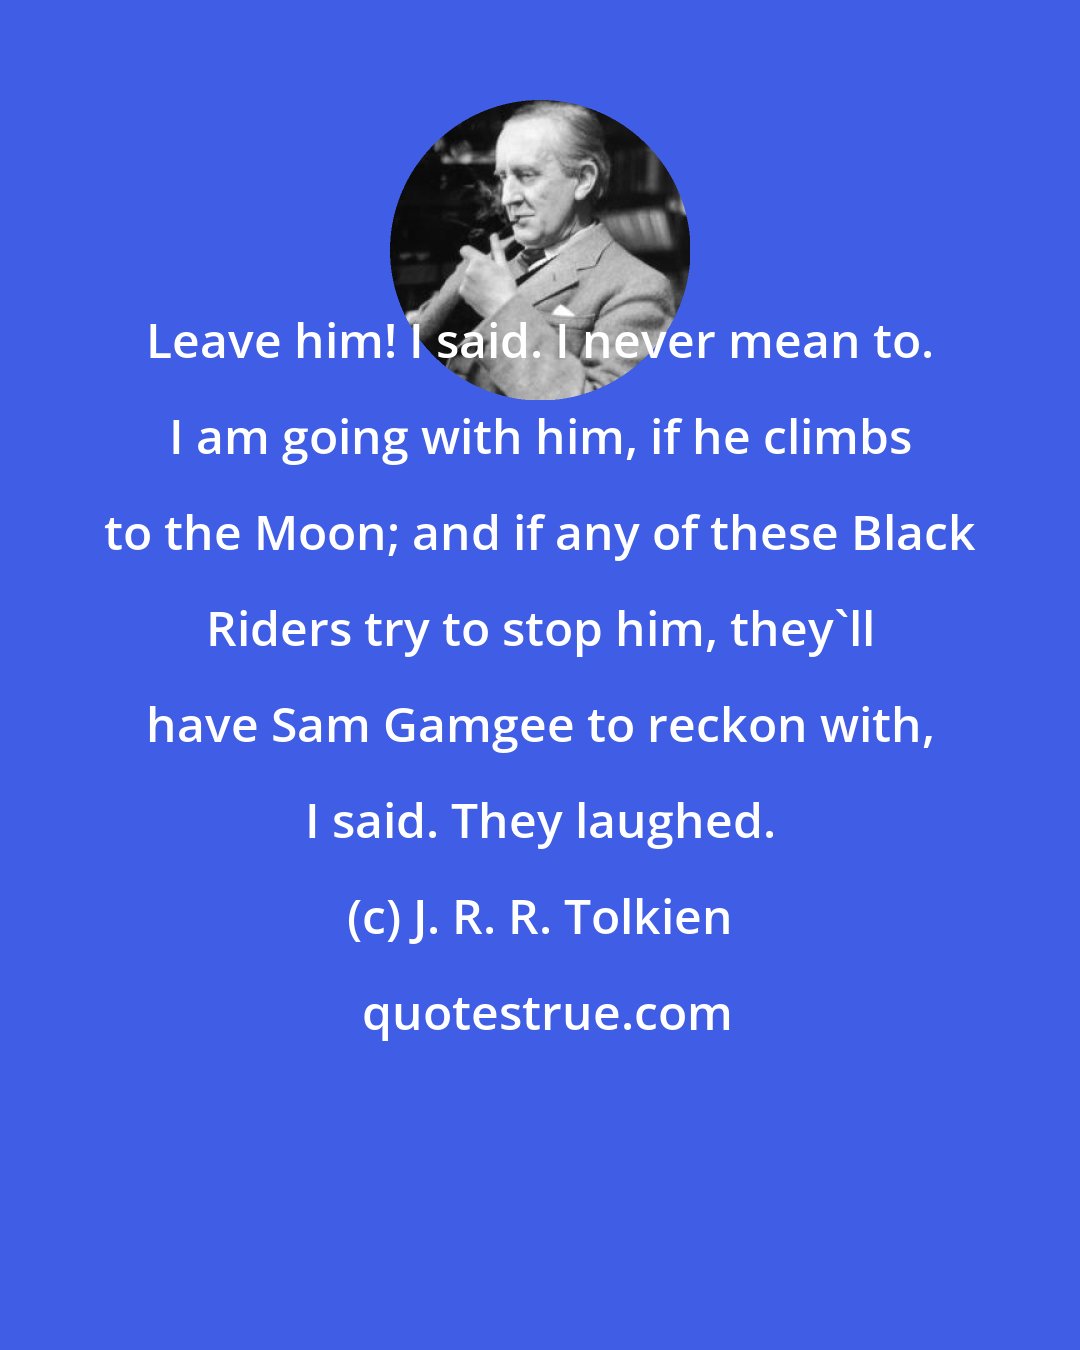 J. R. R. Tolkien: Leave him! I said. I never mean to. I am going with him, if he climbs to the Moon; and if any of these Black Riders try to stop him, they'll have Sam Gamgee to reckon with, I said. They laughed.